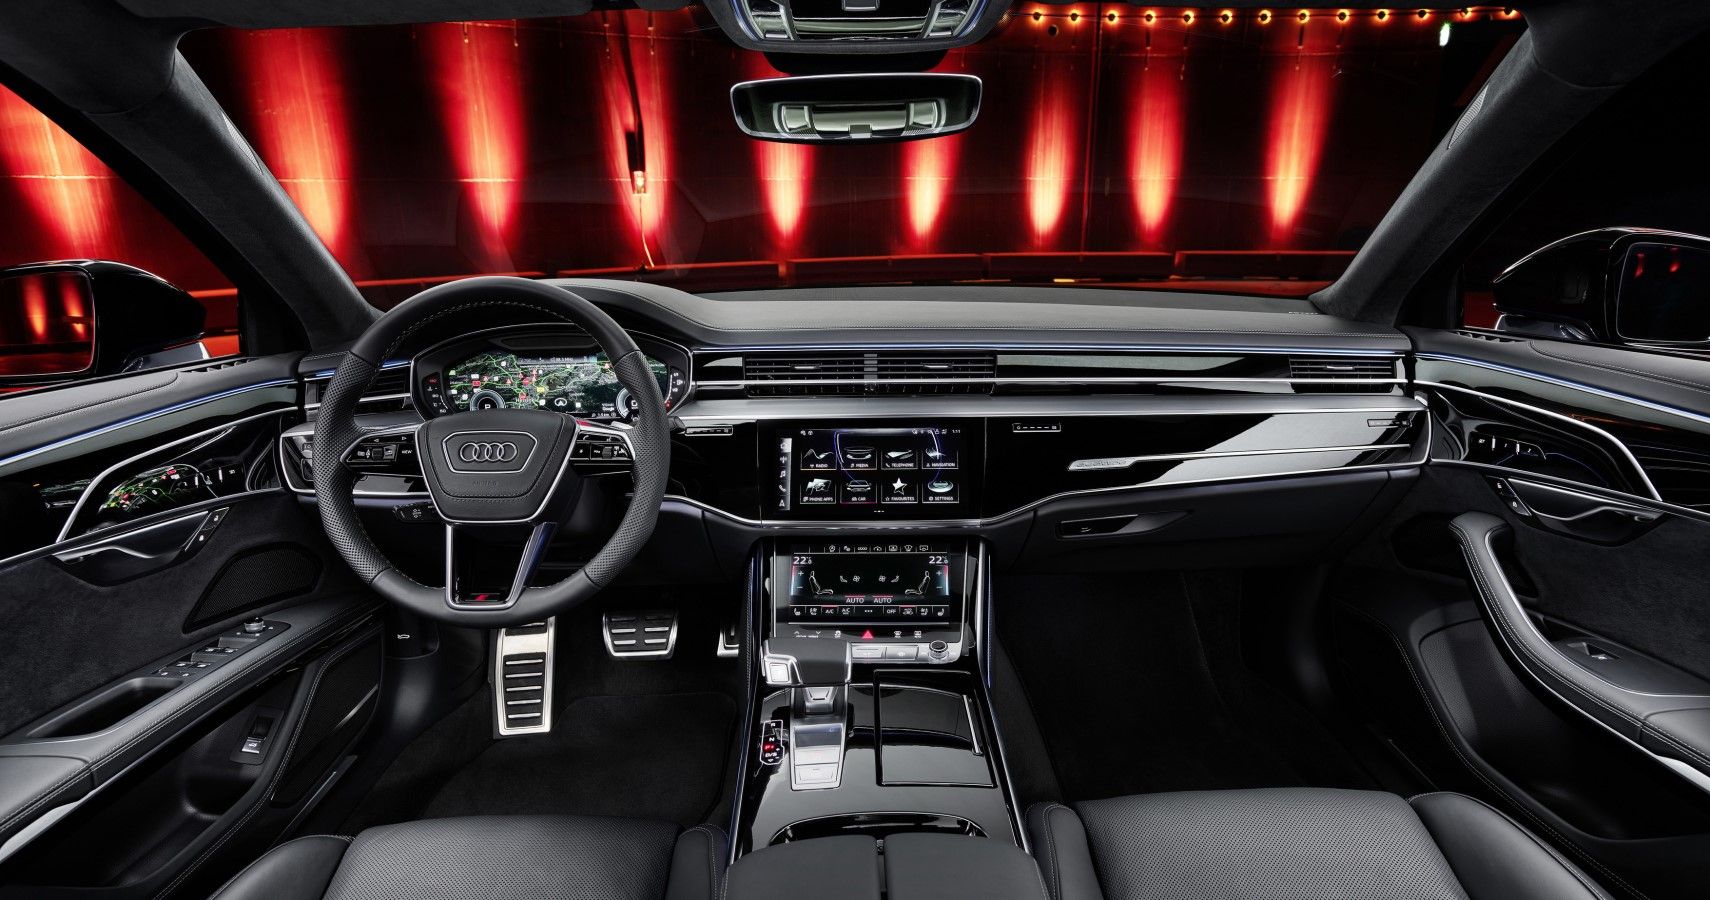 2022 Audi A8 dashboard layout view